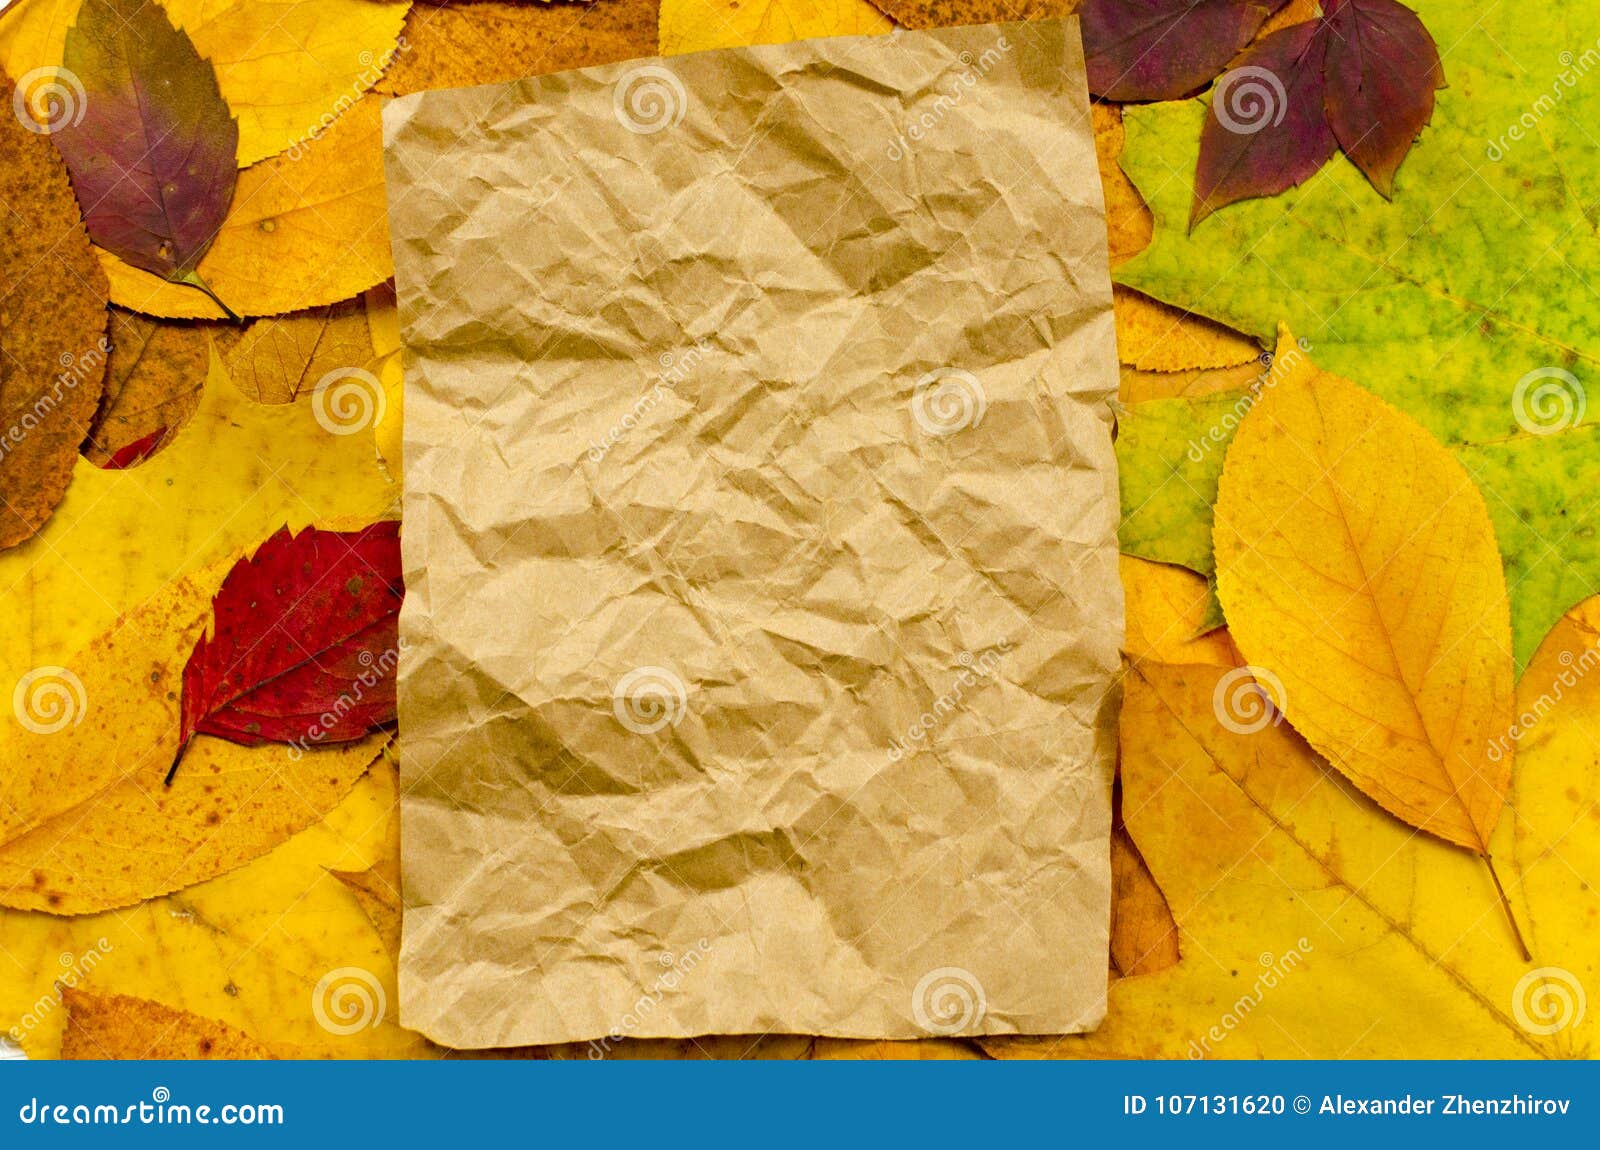 crumpled-sheet-of-craft-paper-on-colored-autumn-leaves-background-with